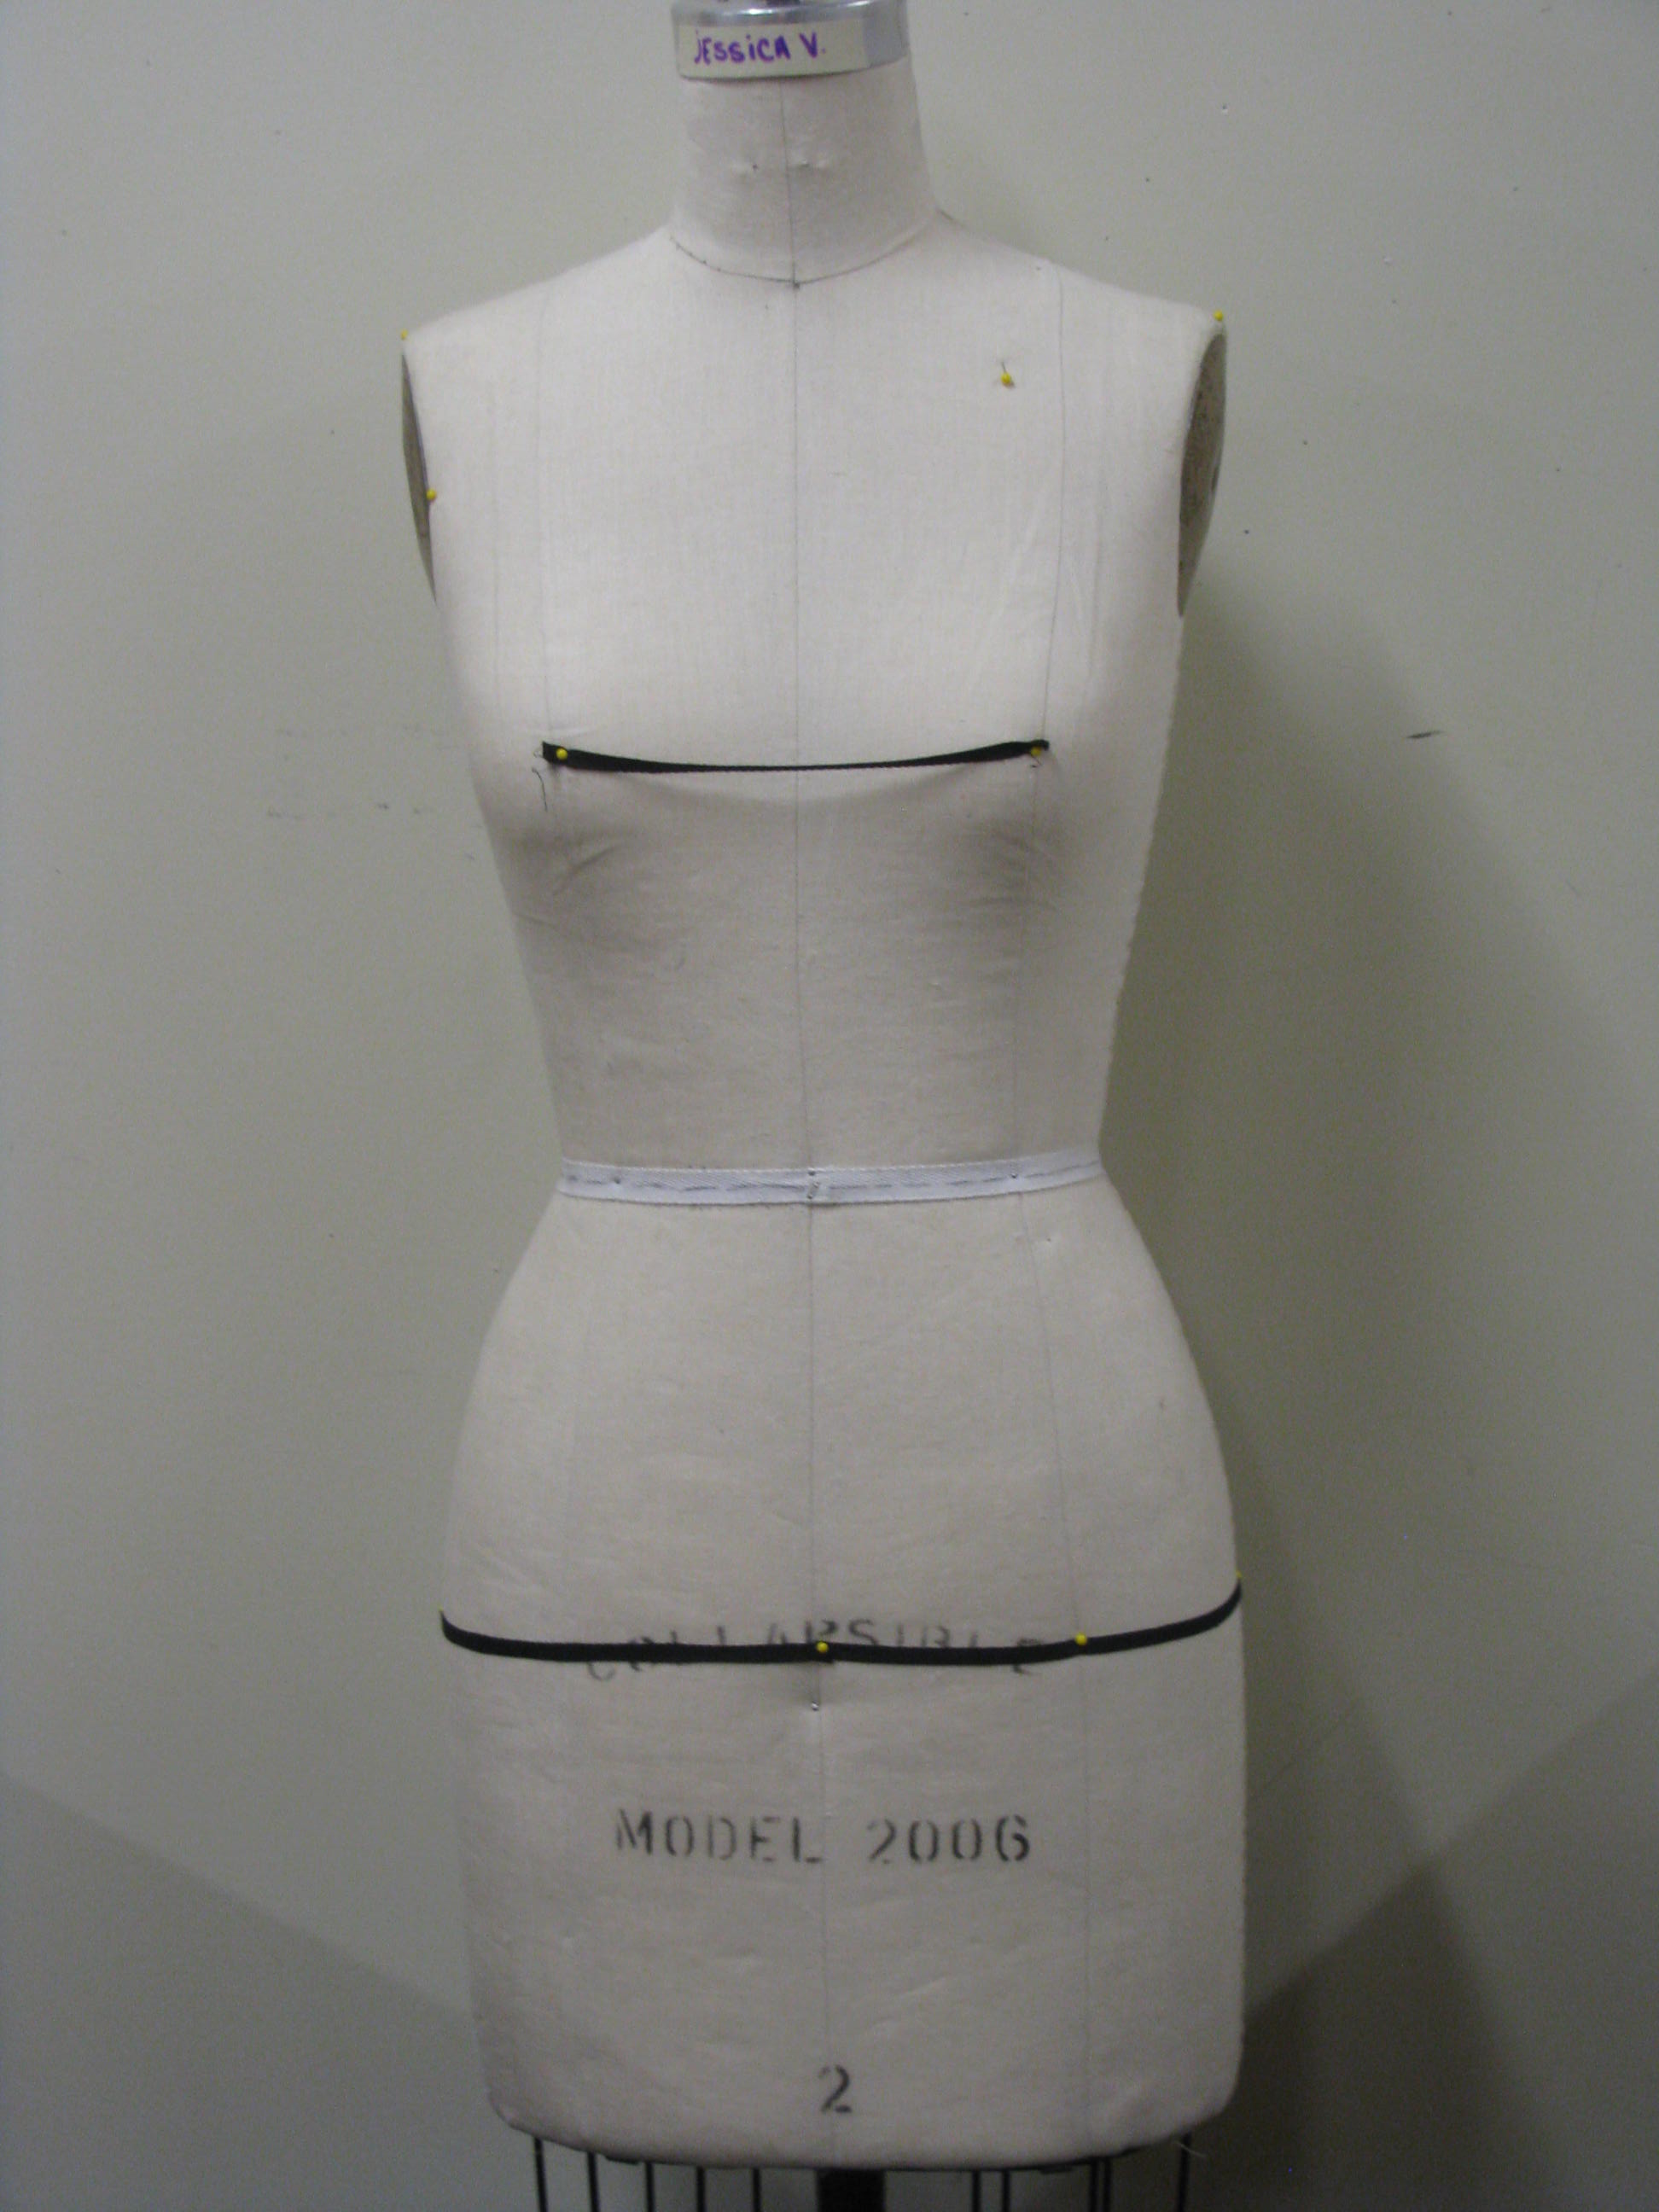 Professional Female Dress Form w/ Removable Magnetic Shoulders